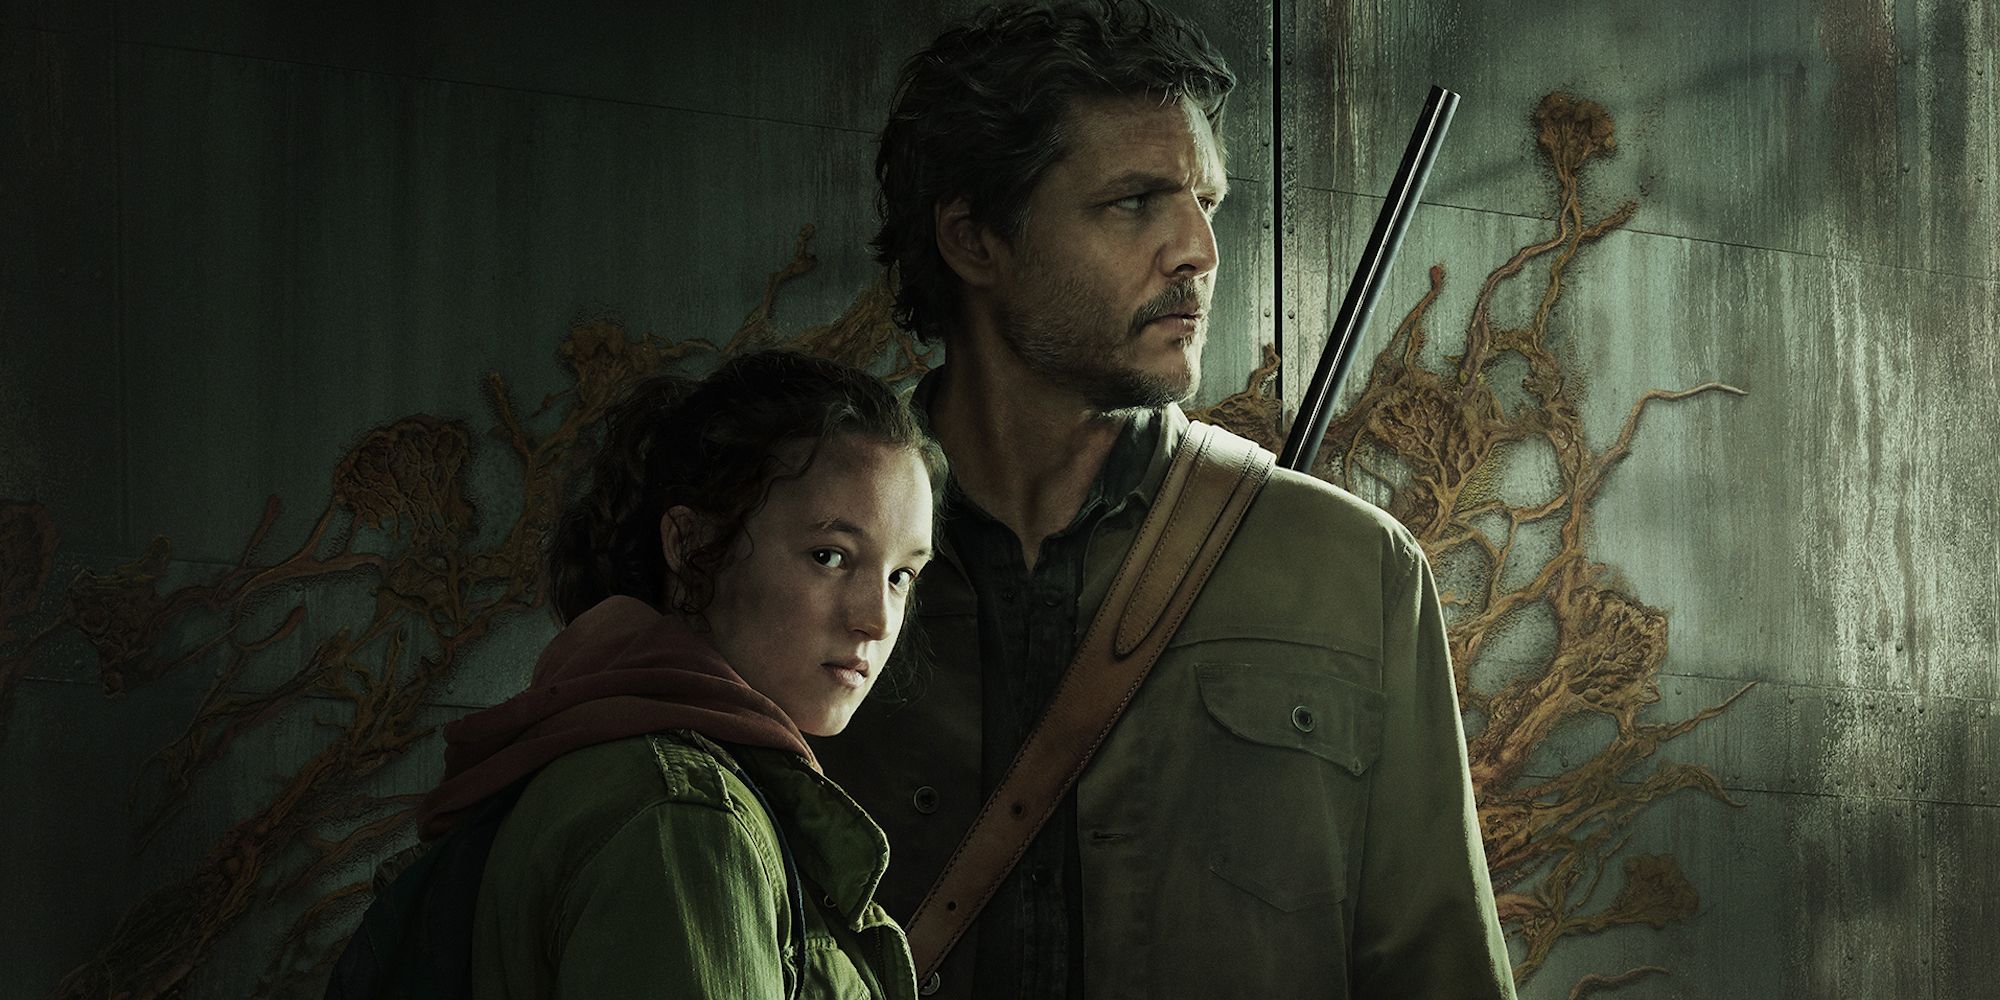 Pedro Pascal as Joel and Bella Ramsey as Ellie in a promo image for The Last of Us